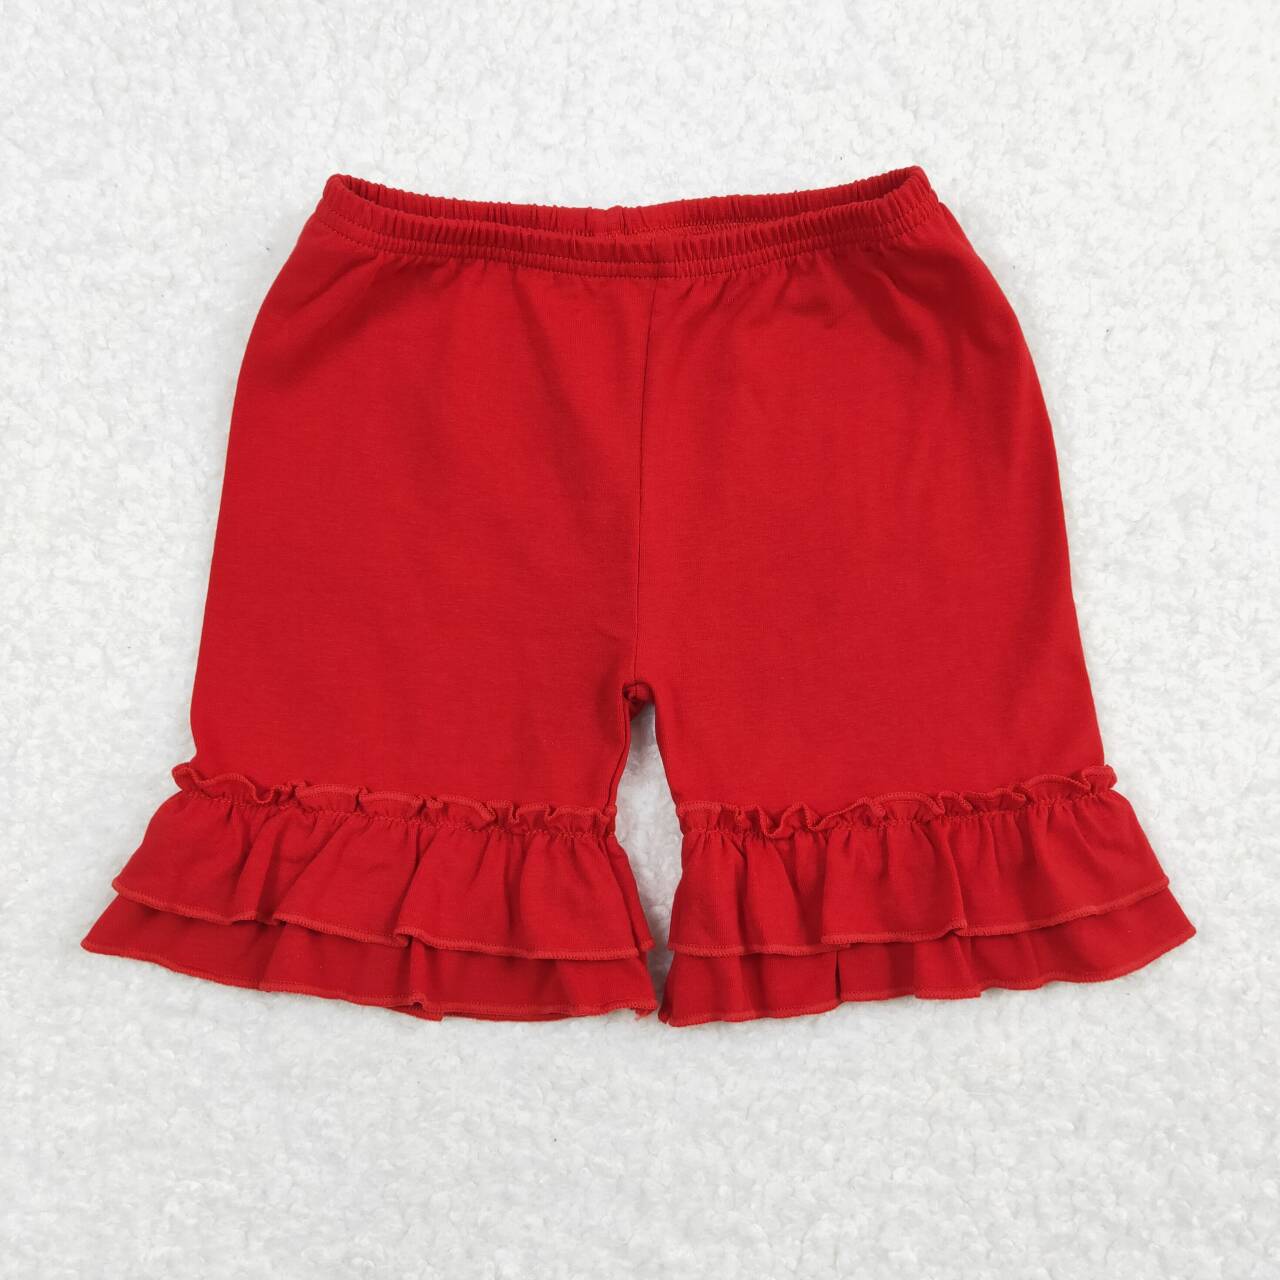 GSSO0793  Baseball Top Red Shorts Girls Summer Clothes Set